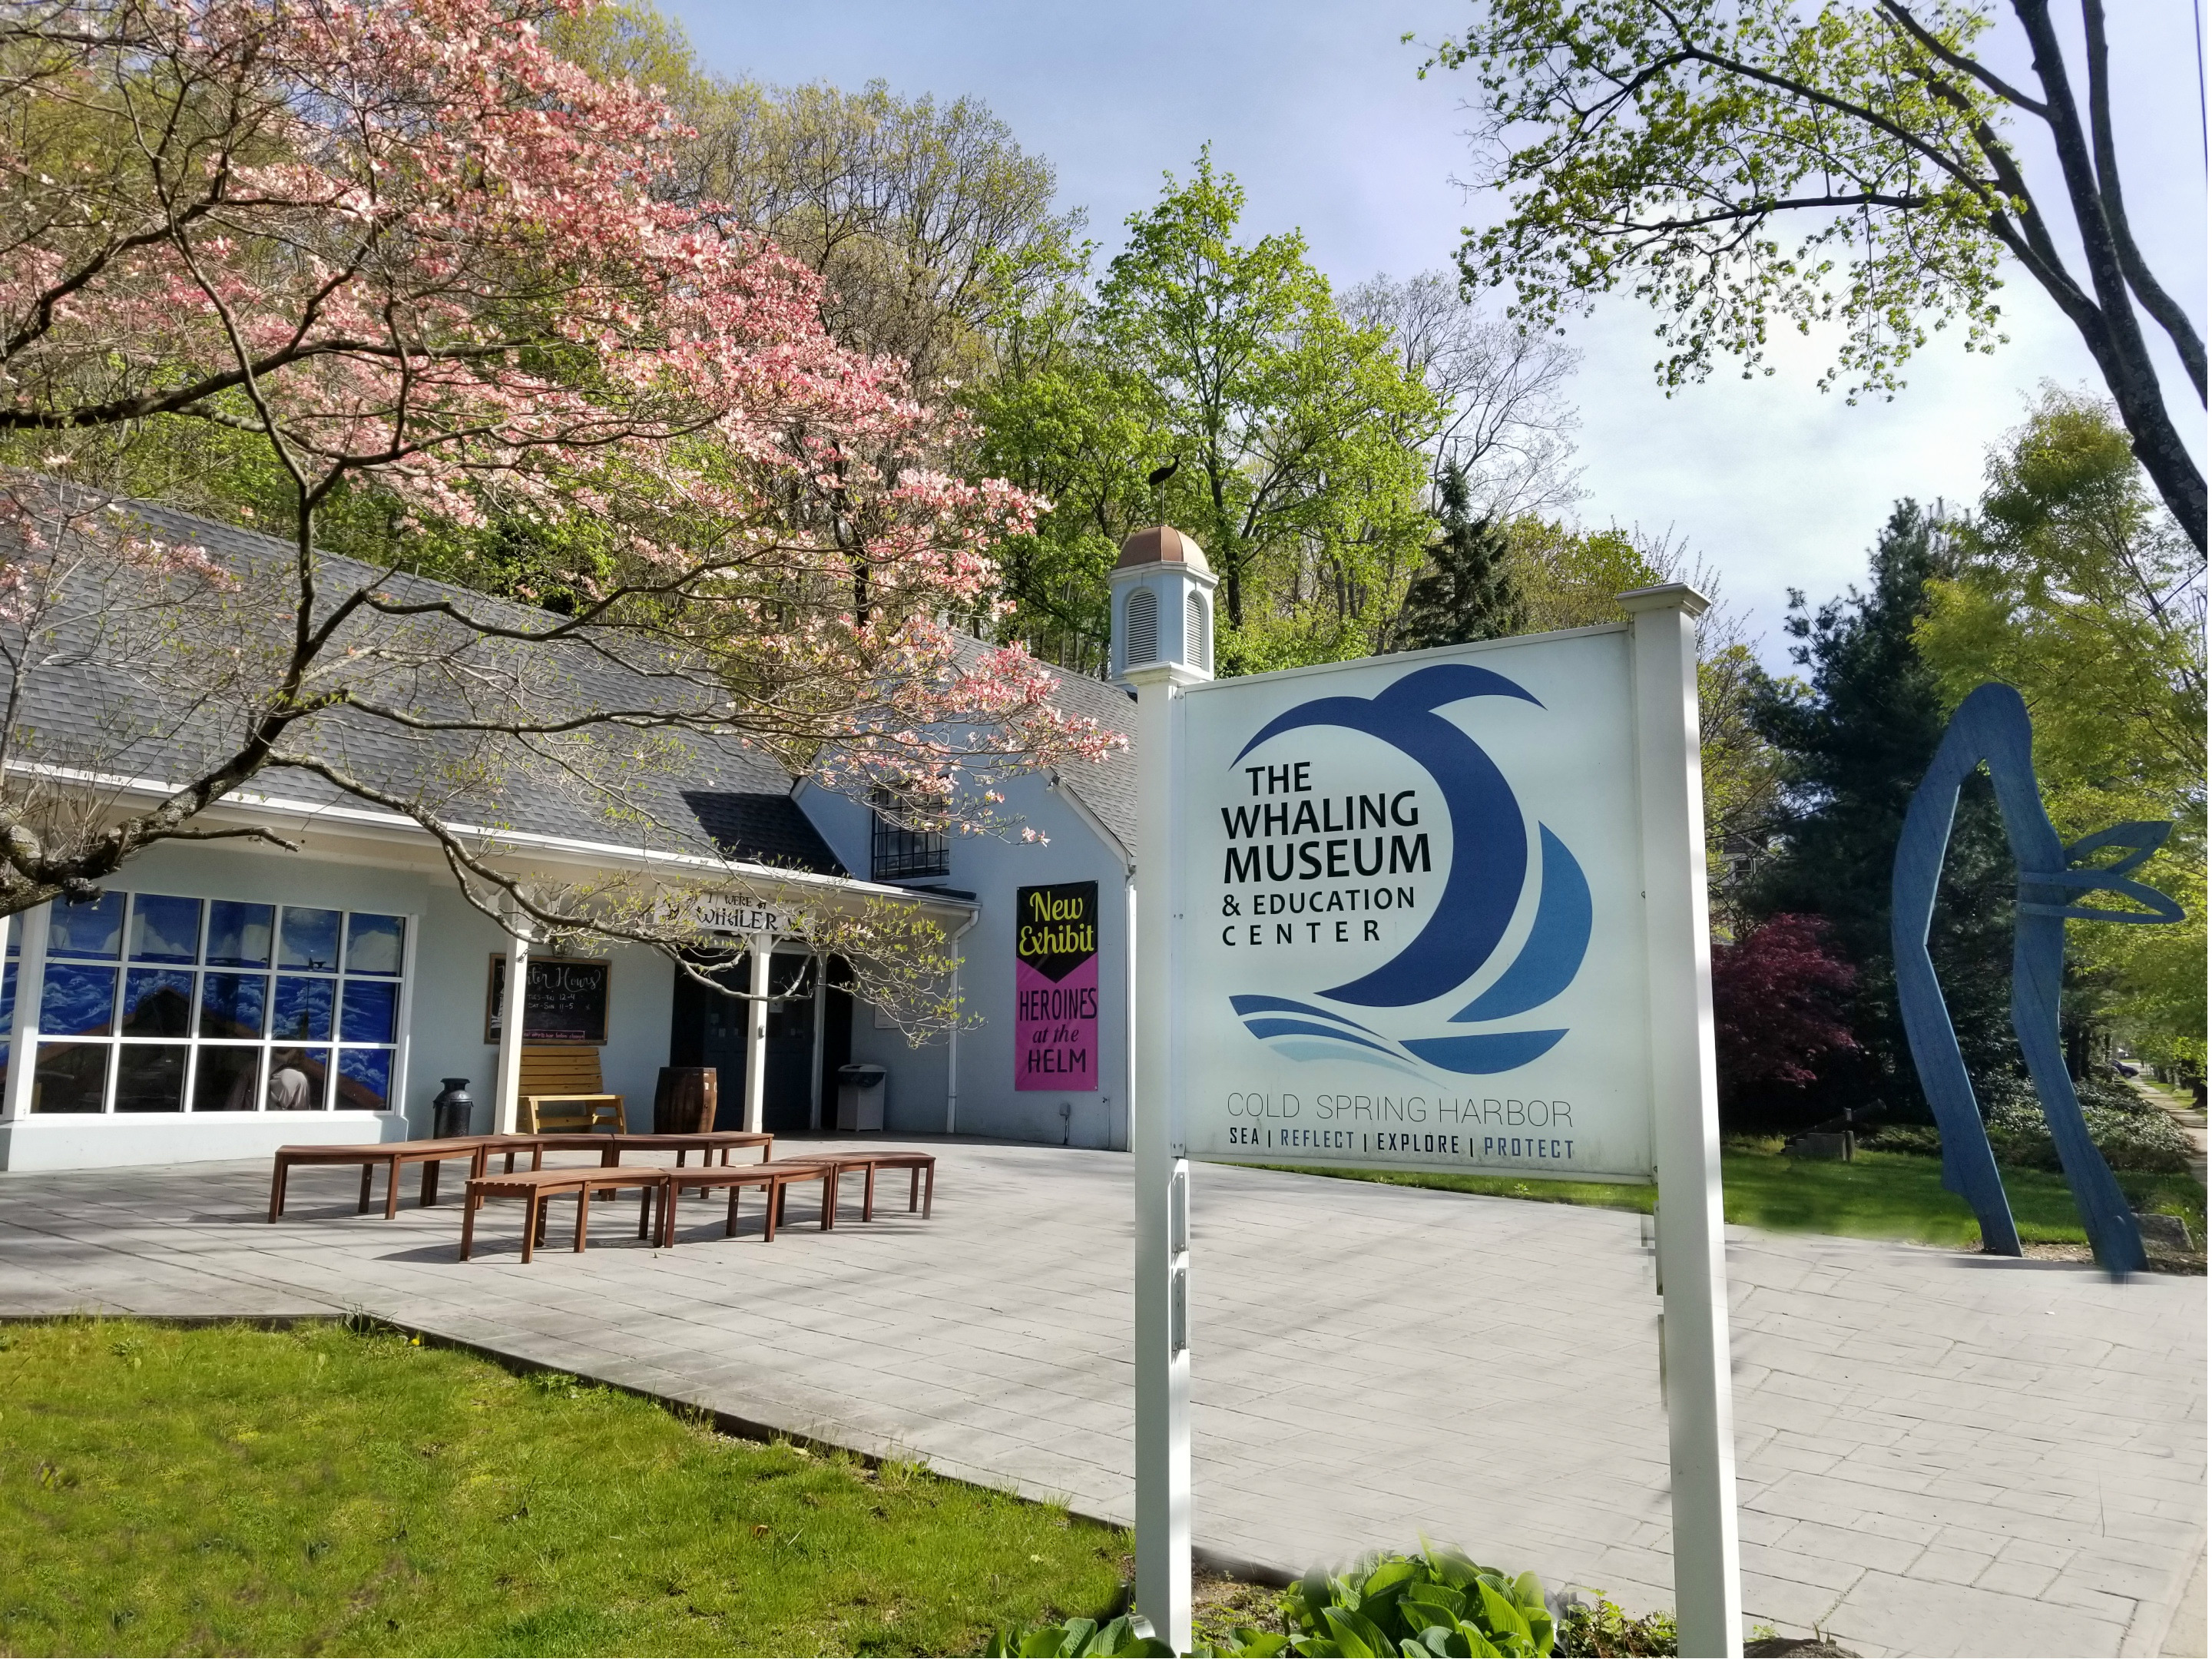 Csh The Whaling Museum Education Center Cold Spring Harbor Ny 11724 [ 2160 x 2880 Pixel ]